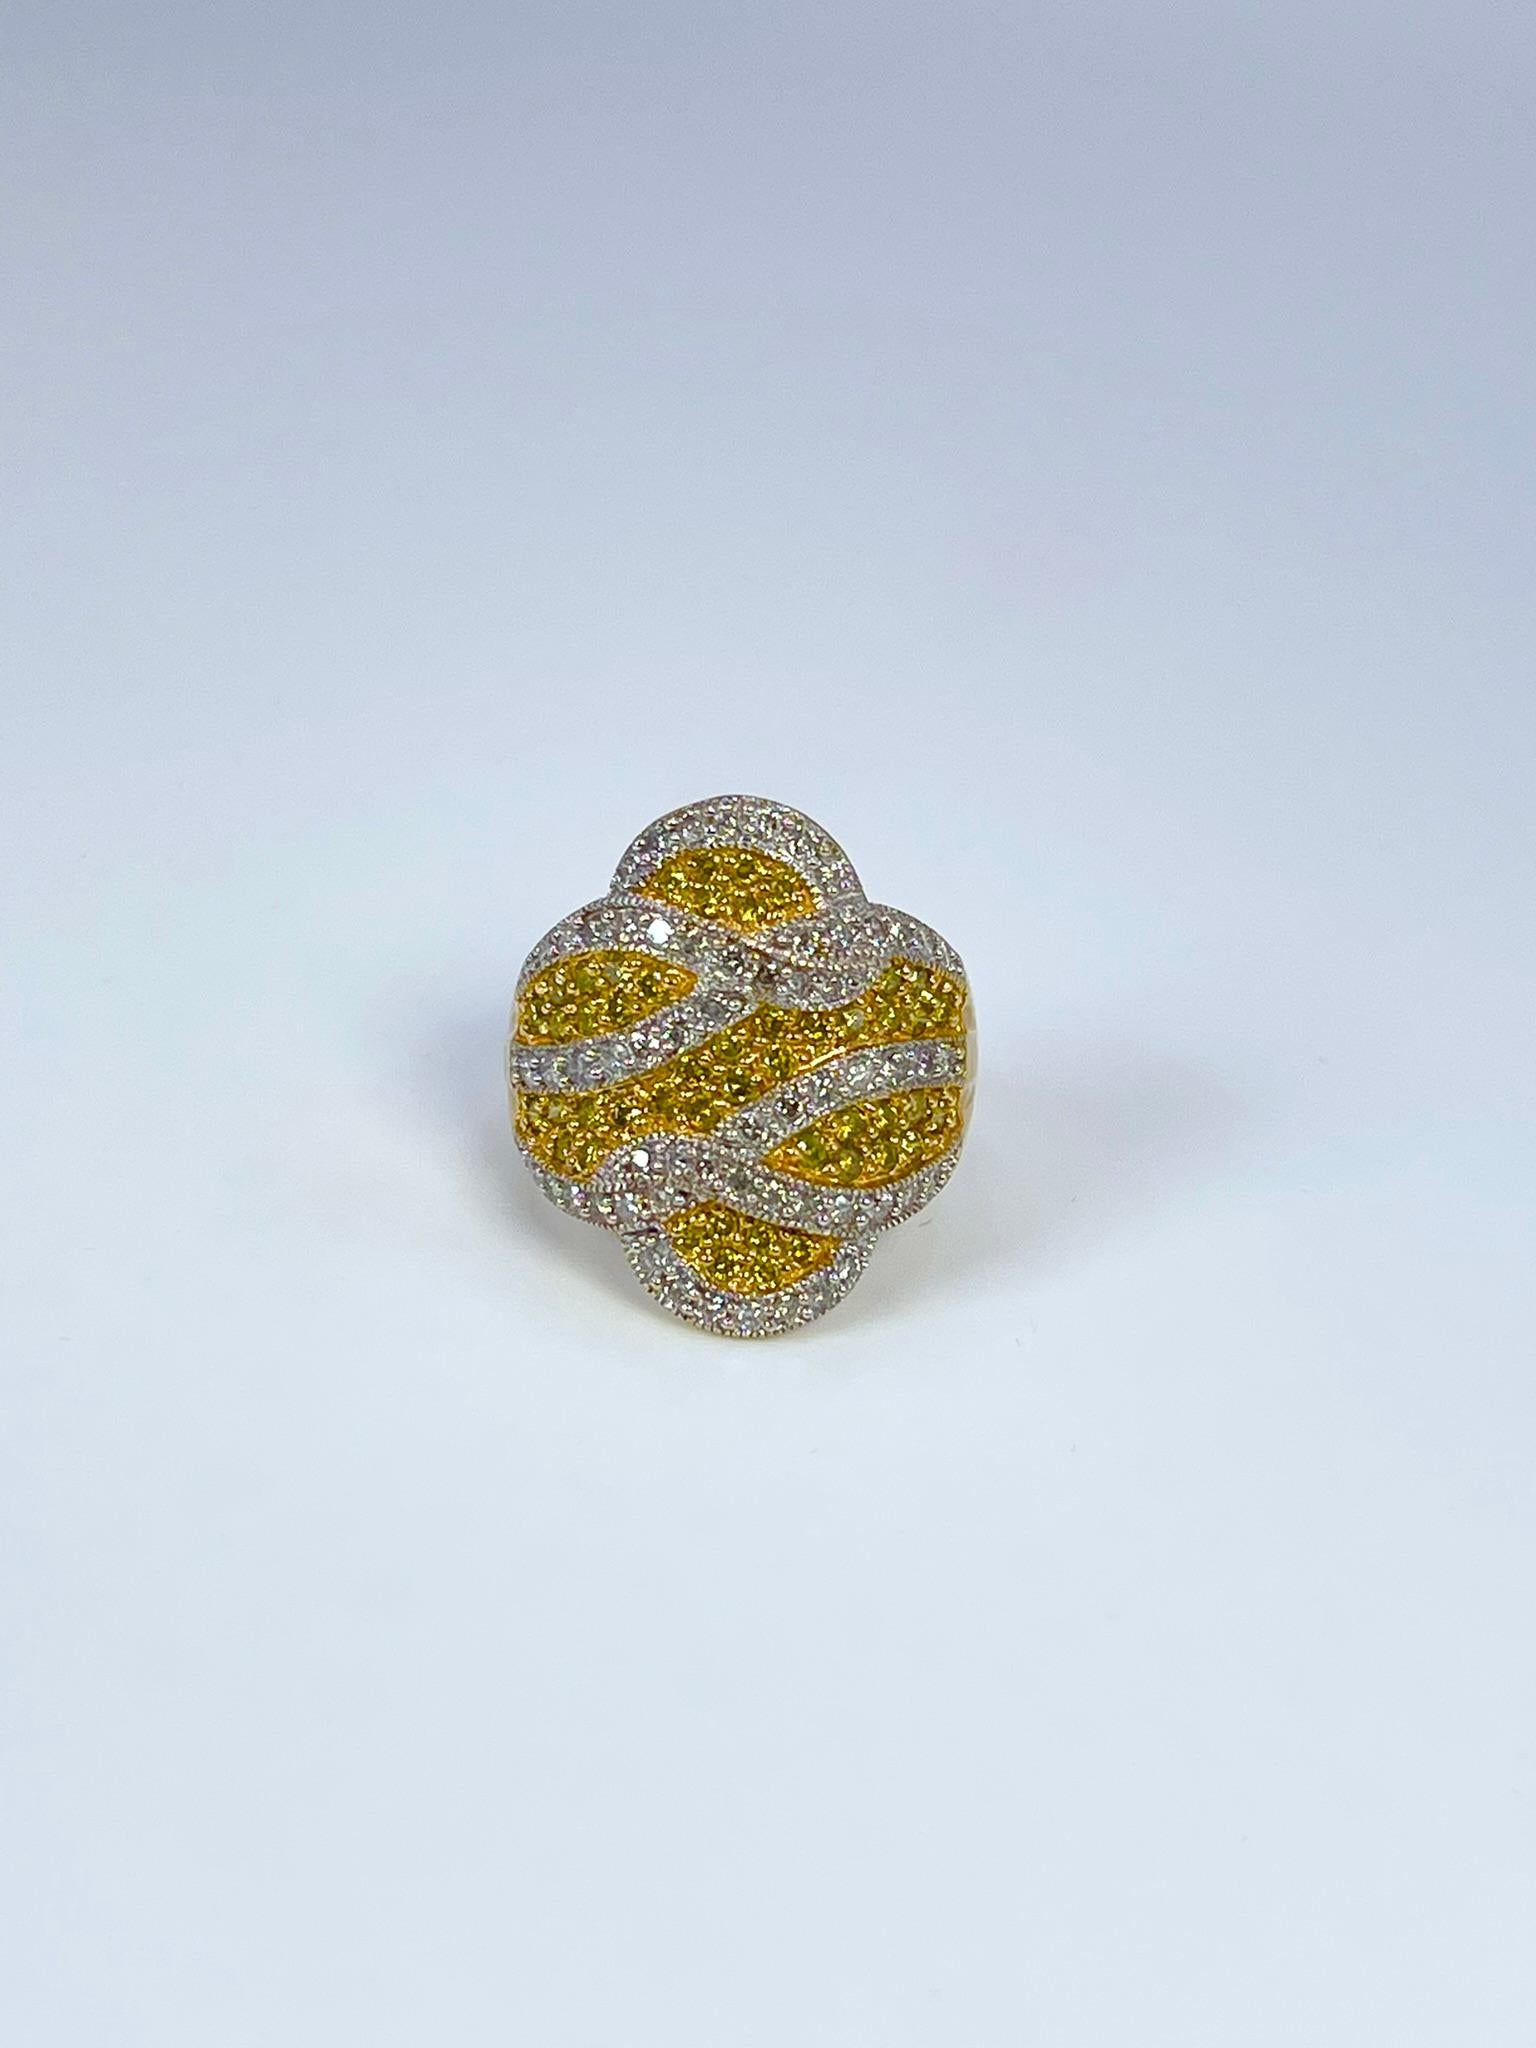 Beautifully crafted fancy yellow diamond cocktail diamond ring in 14KT yellow gold.

GRAM WEIGHT: 6.24gr
METAL: 14KT yellow gold

NATURAL DIAMOND(S)
Cut: Round Brilliant 
Color: Fancy Yellow(NATURAL), White (G-H)
Clarity: SI
Carat: 1.28ct
Size: